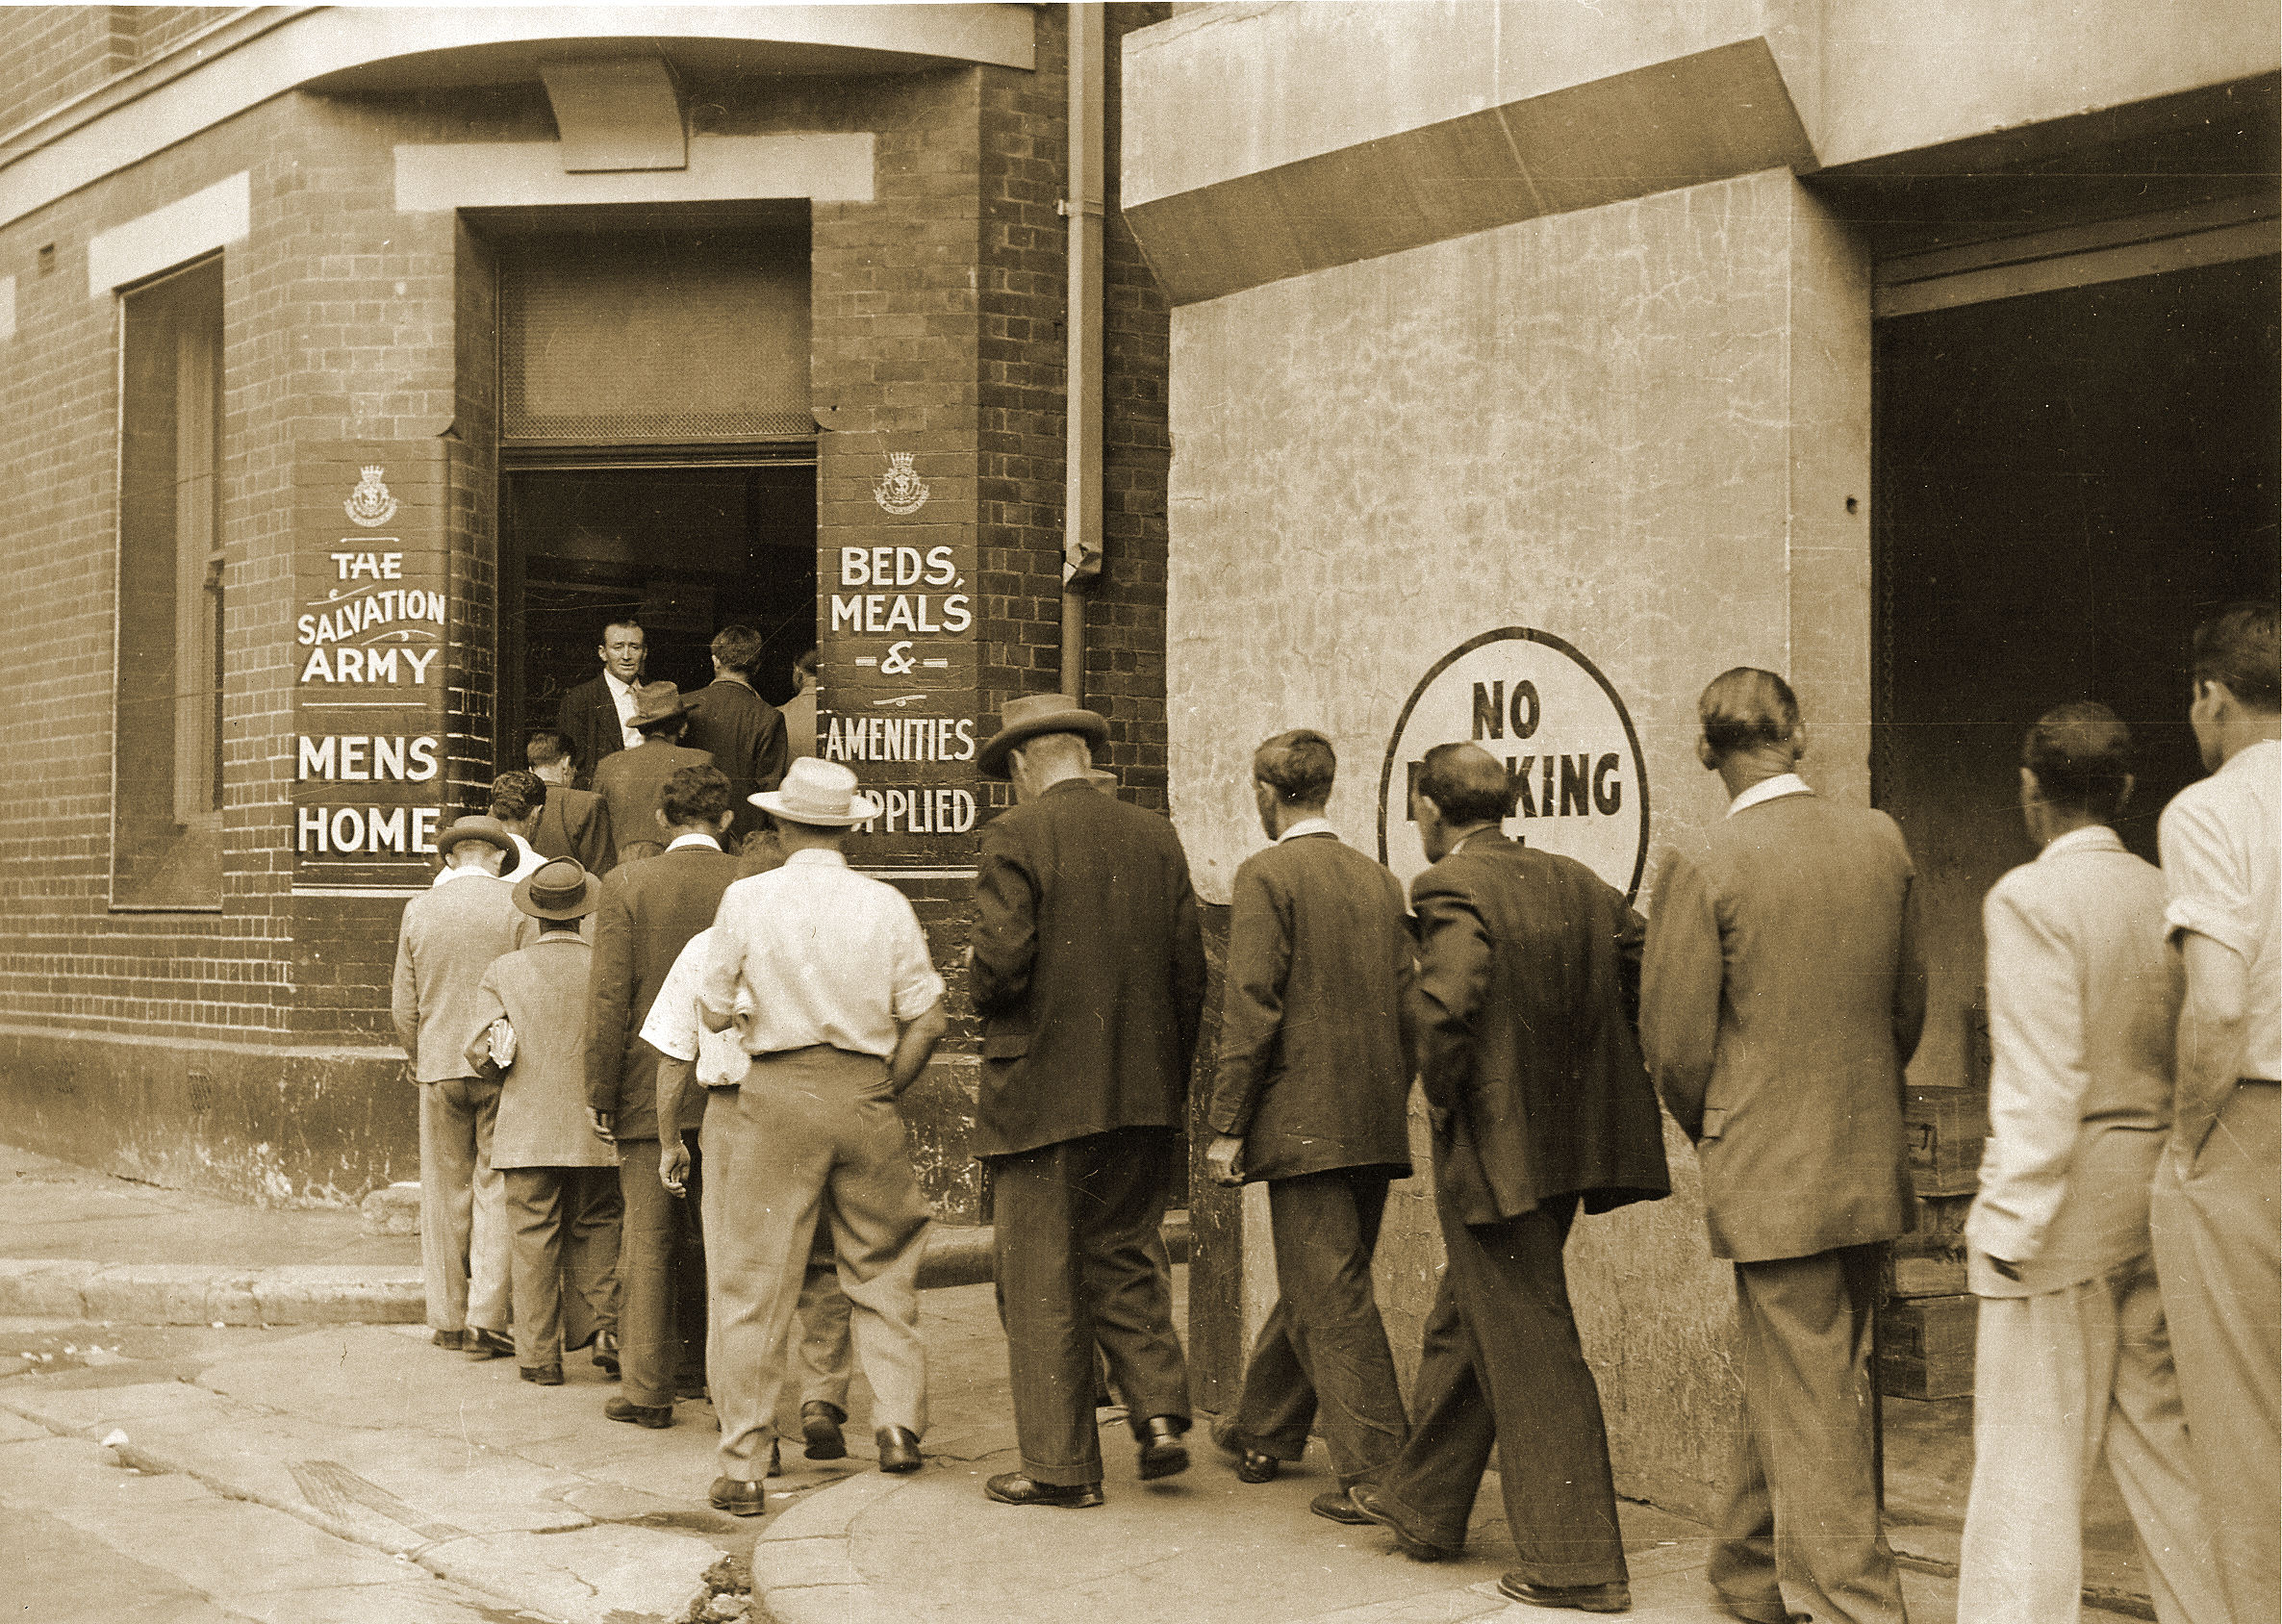 Men line up outside The Salvation Army's Foster House